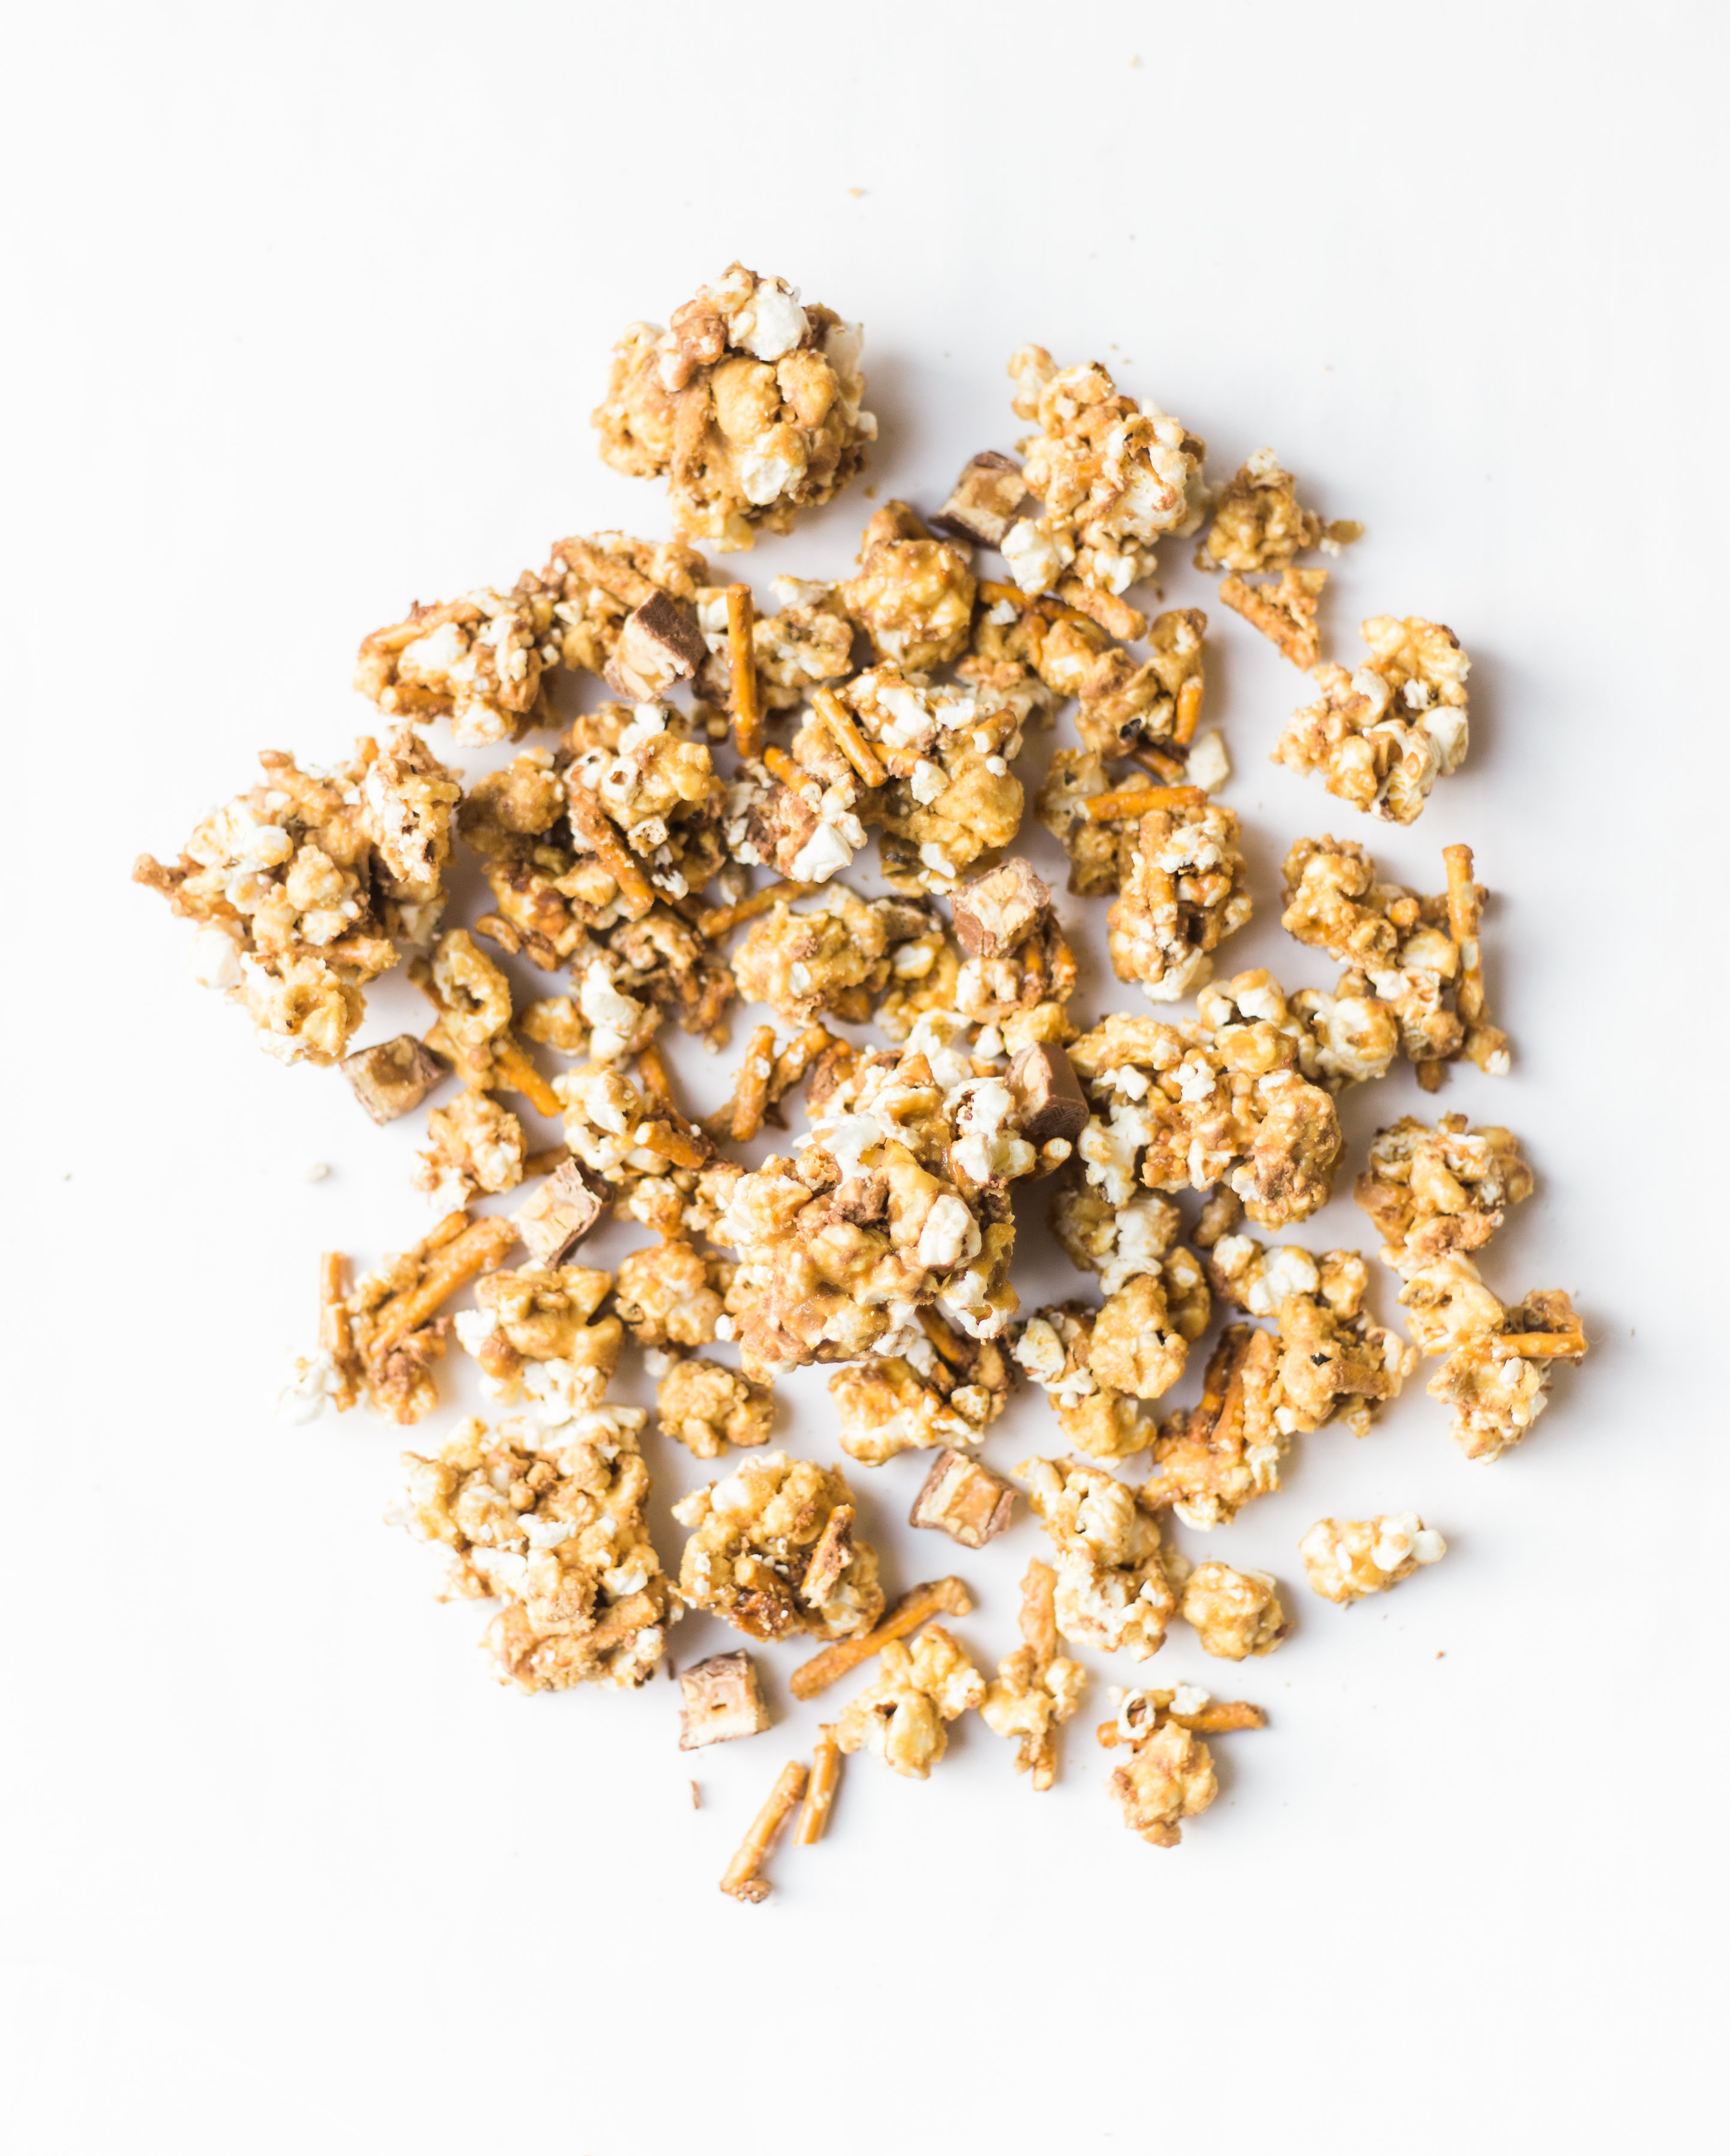 How to make your new favorite game day salted pretzel Snickers vanilla caramel corn. This sweet and salty mixture is just TOO GOOD. Click through for the recipe. | glitterinc.com | @glitterinc